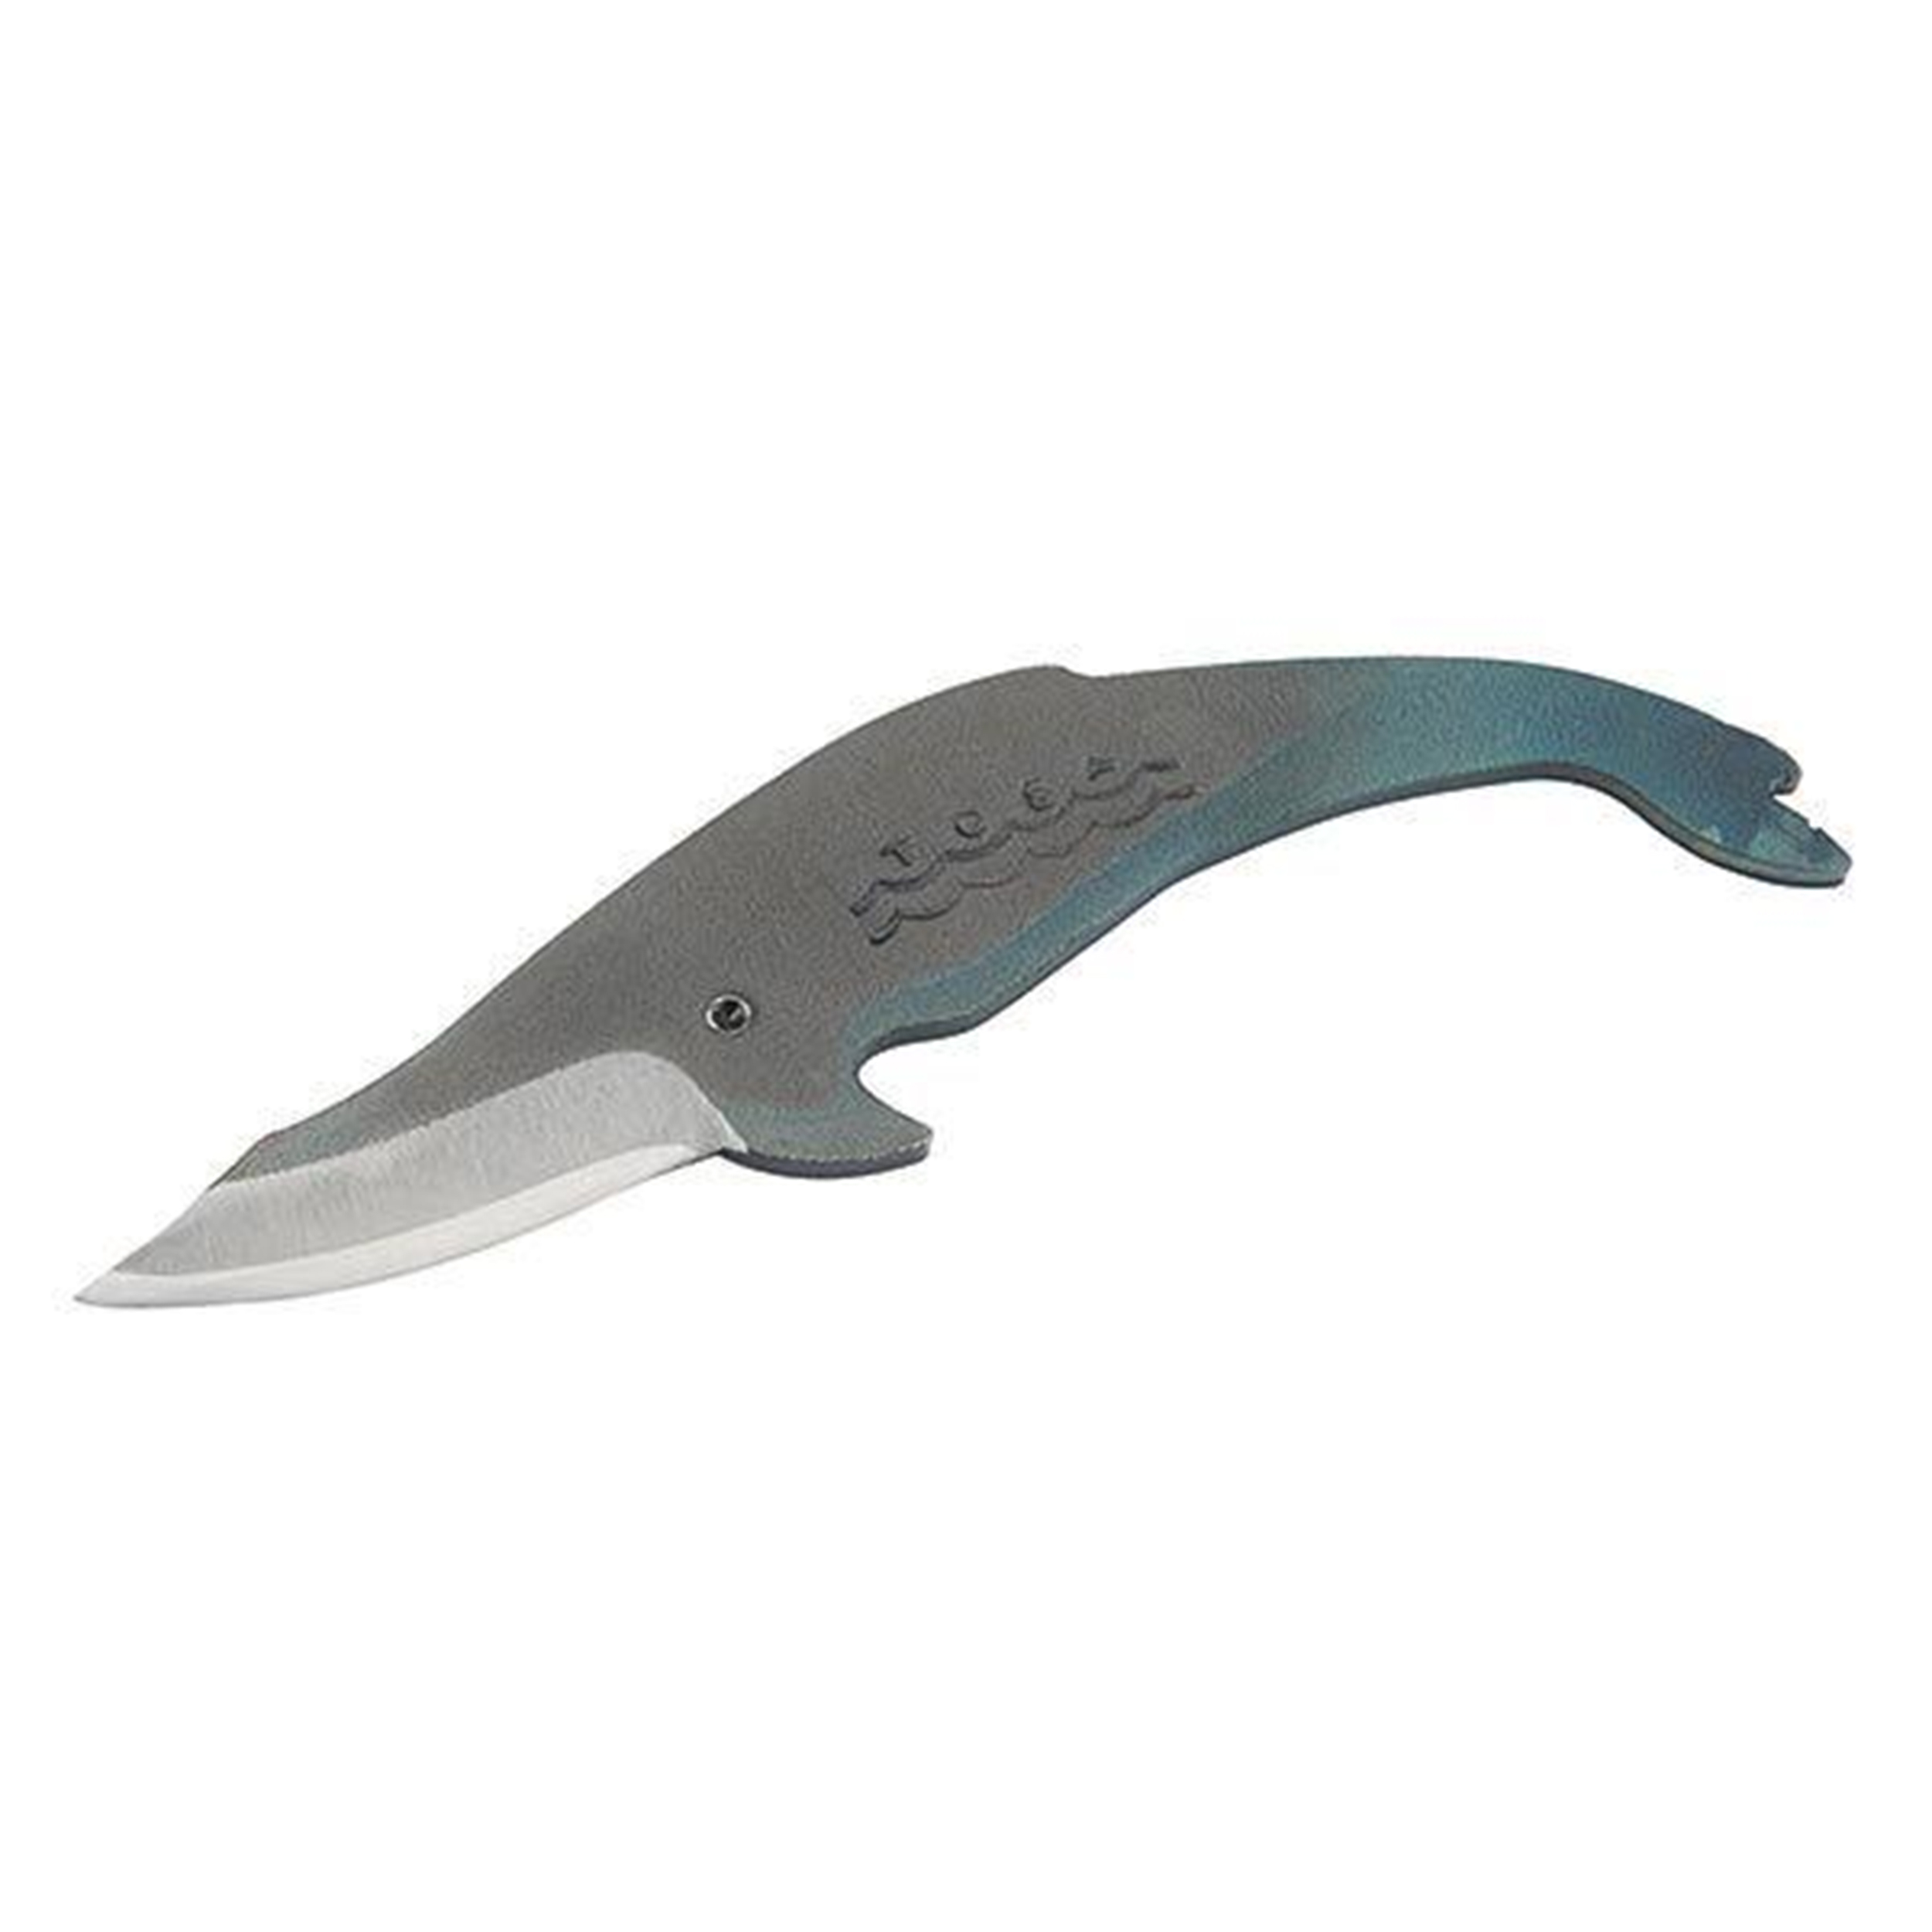 Minke Whale, Hand-forged, Traditional Pencil Sharpening Knife